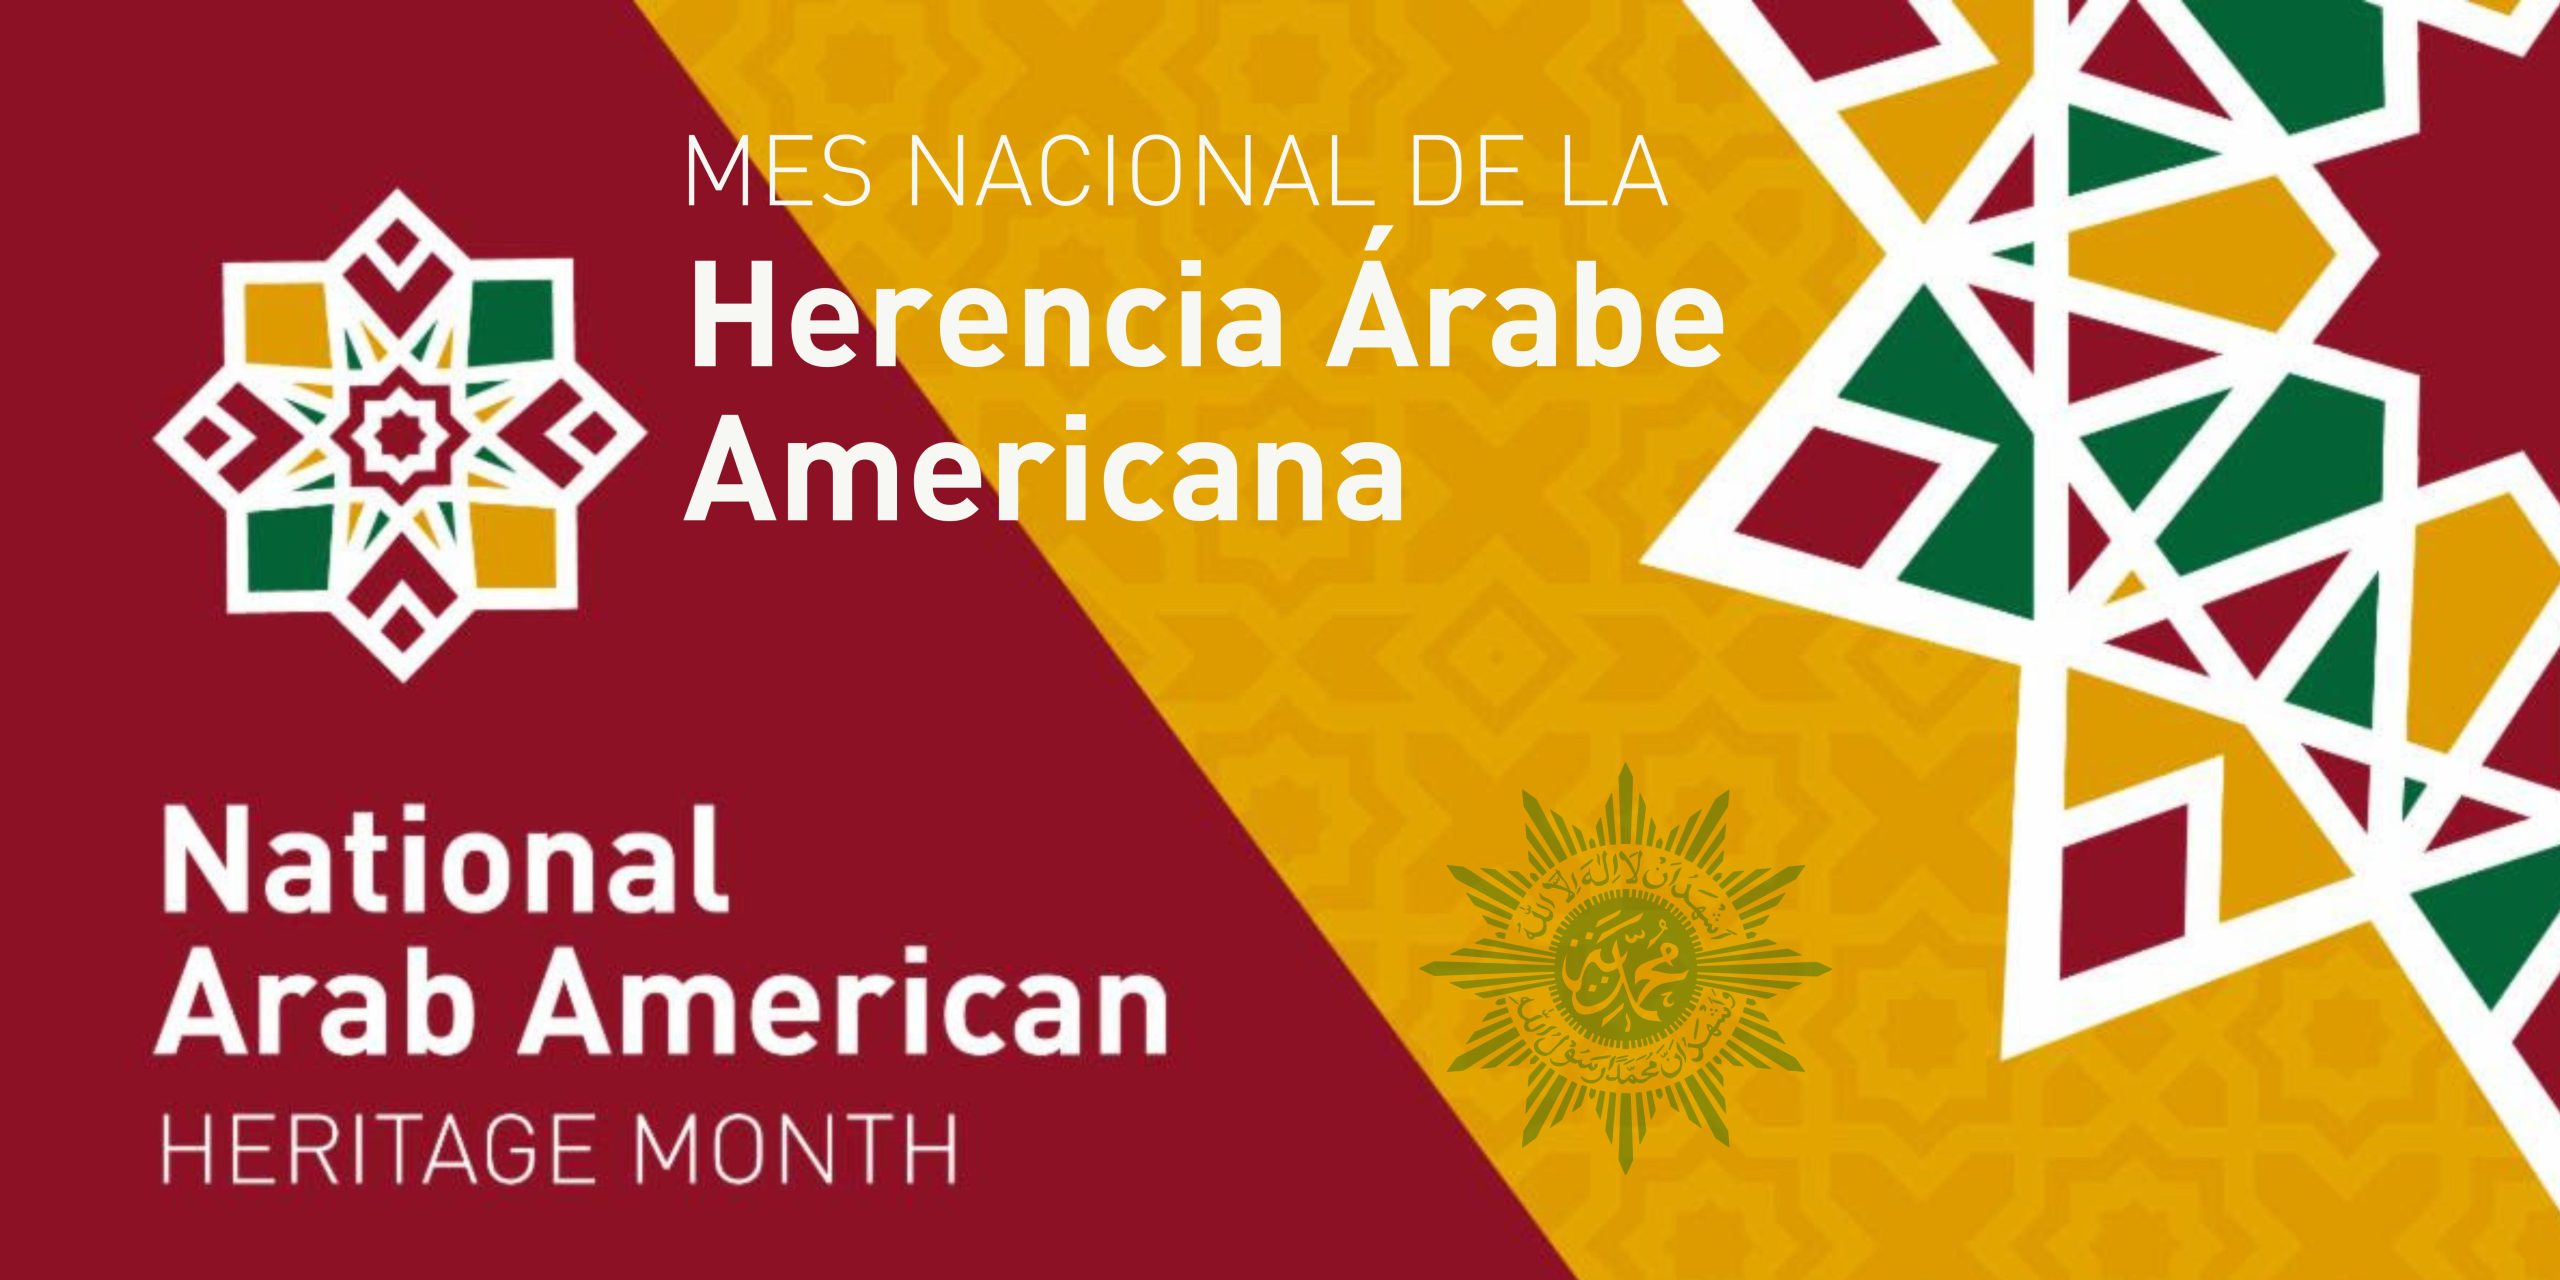 Dark red and gold background with white text saying, "National Arab American Heritage Month" and "Mes Nacional de la Herencia Árabe Americana"